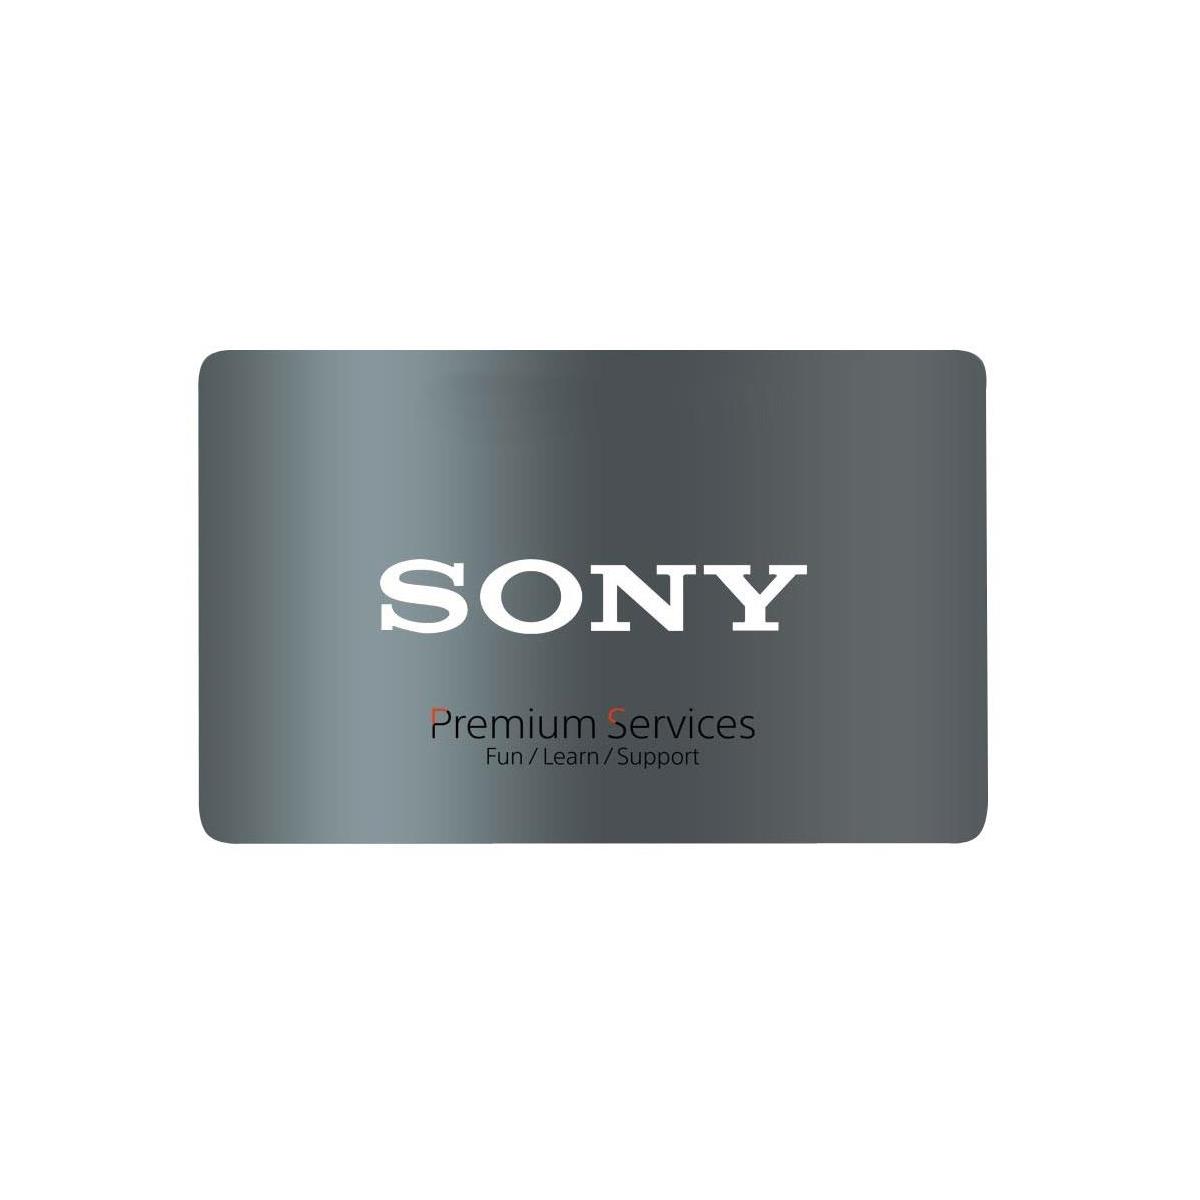 Sony Protect Plus Consumer Warranty for Cameras/Lenses Up To $1500, 3 Year Plan -  1020110931